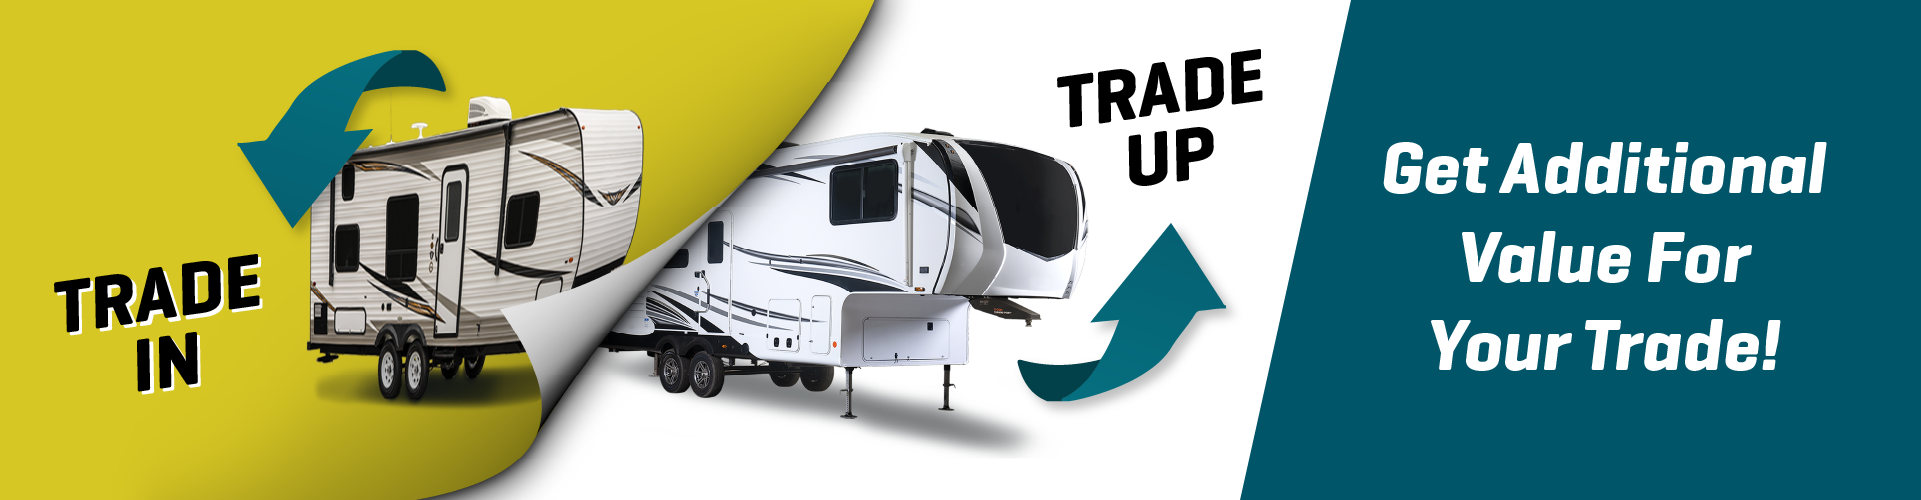 We want your trade -Get additional value added now to your towable trade-in! See dealer for details